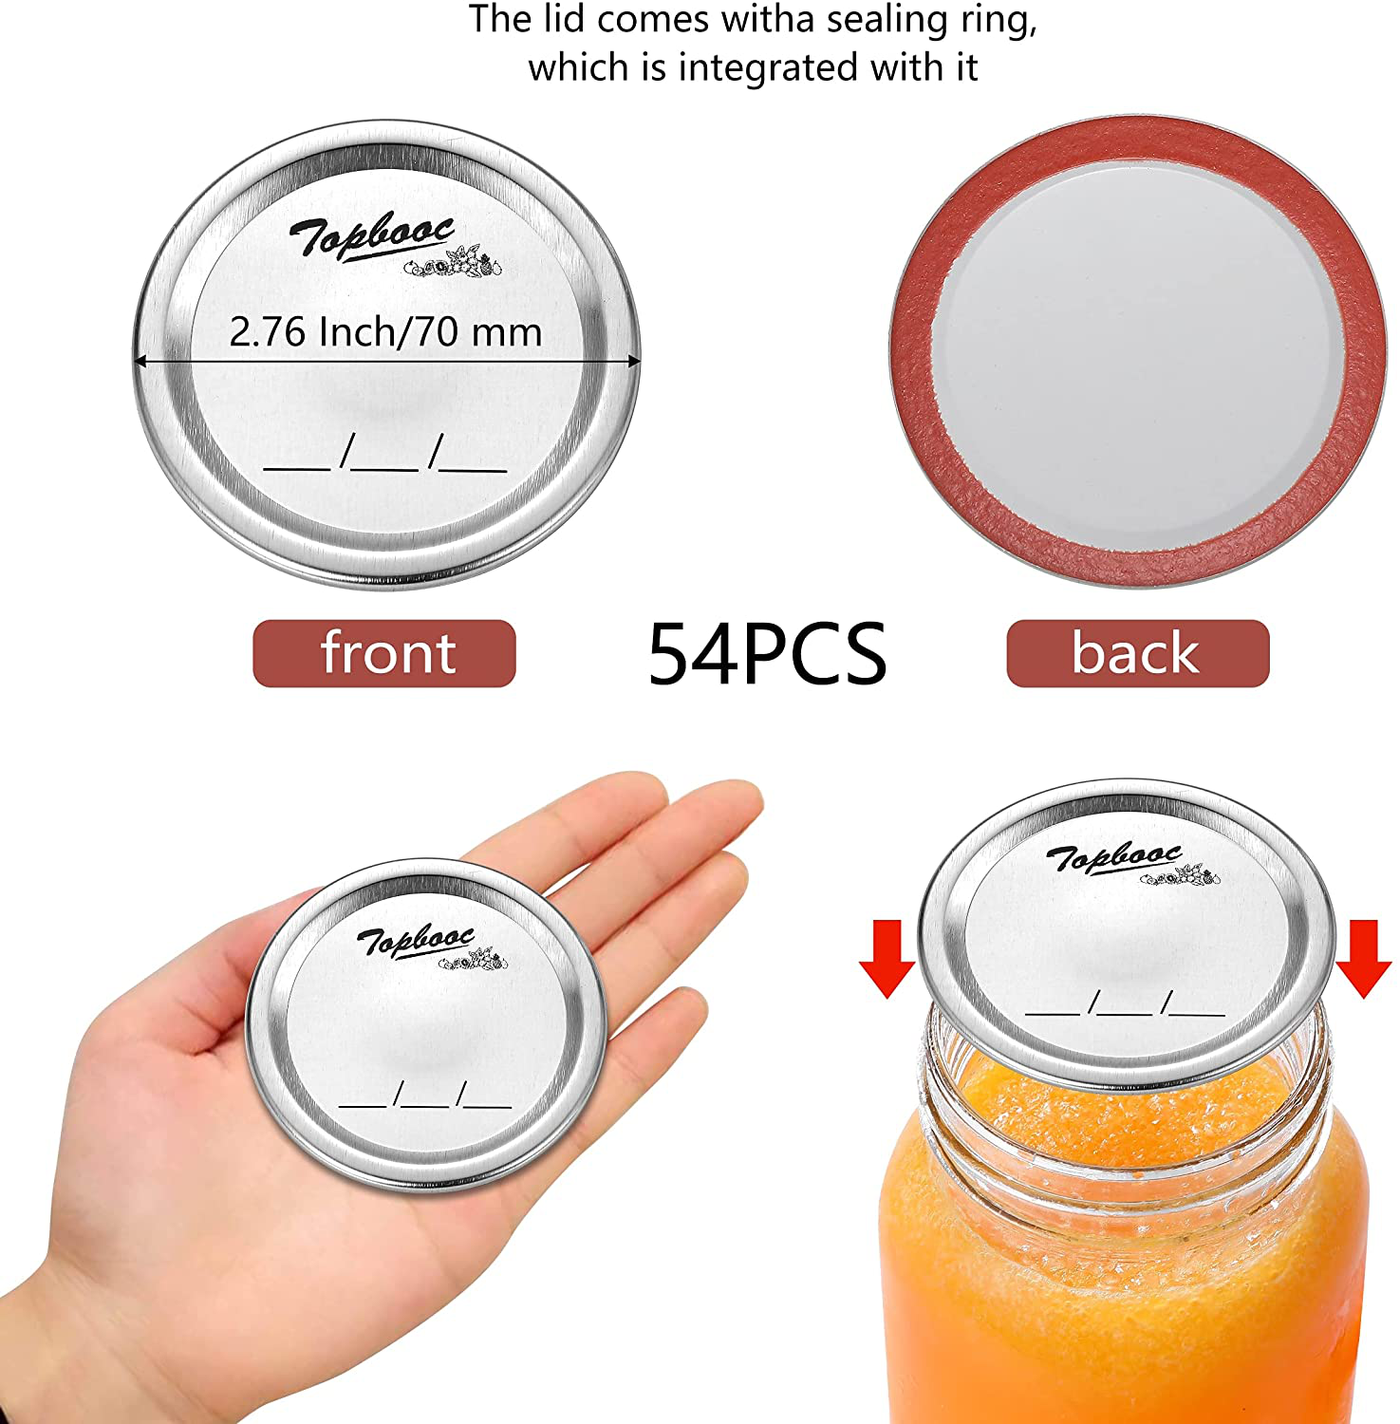 300-Count,Regular Mouth Canning Lids for Ball, Kerr Jars - Split-Type Metal Mason Jar Lids for Canning - Food Grade Material, 100% Fit & Airtight for Regular Mouth Jars